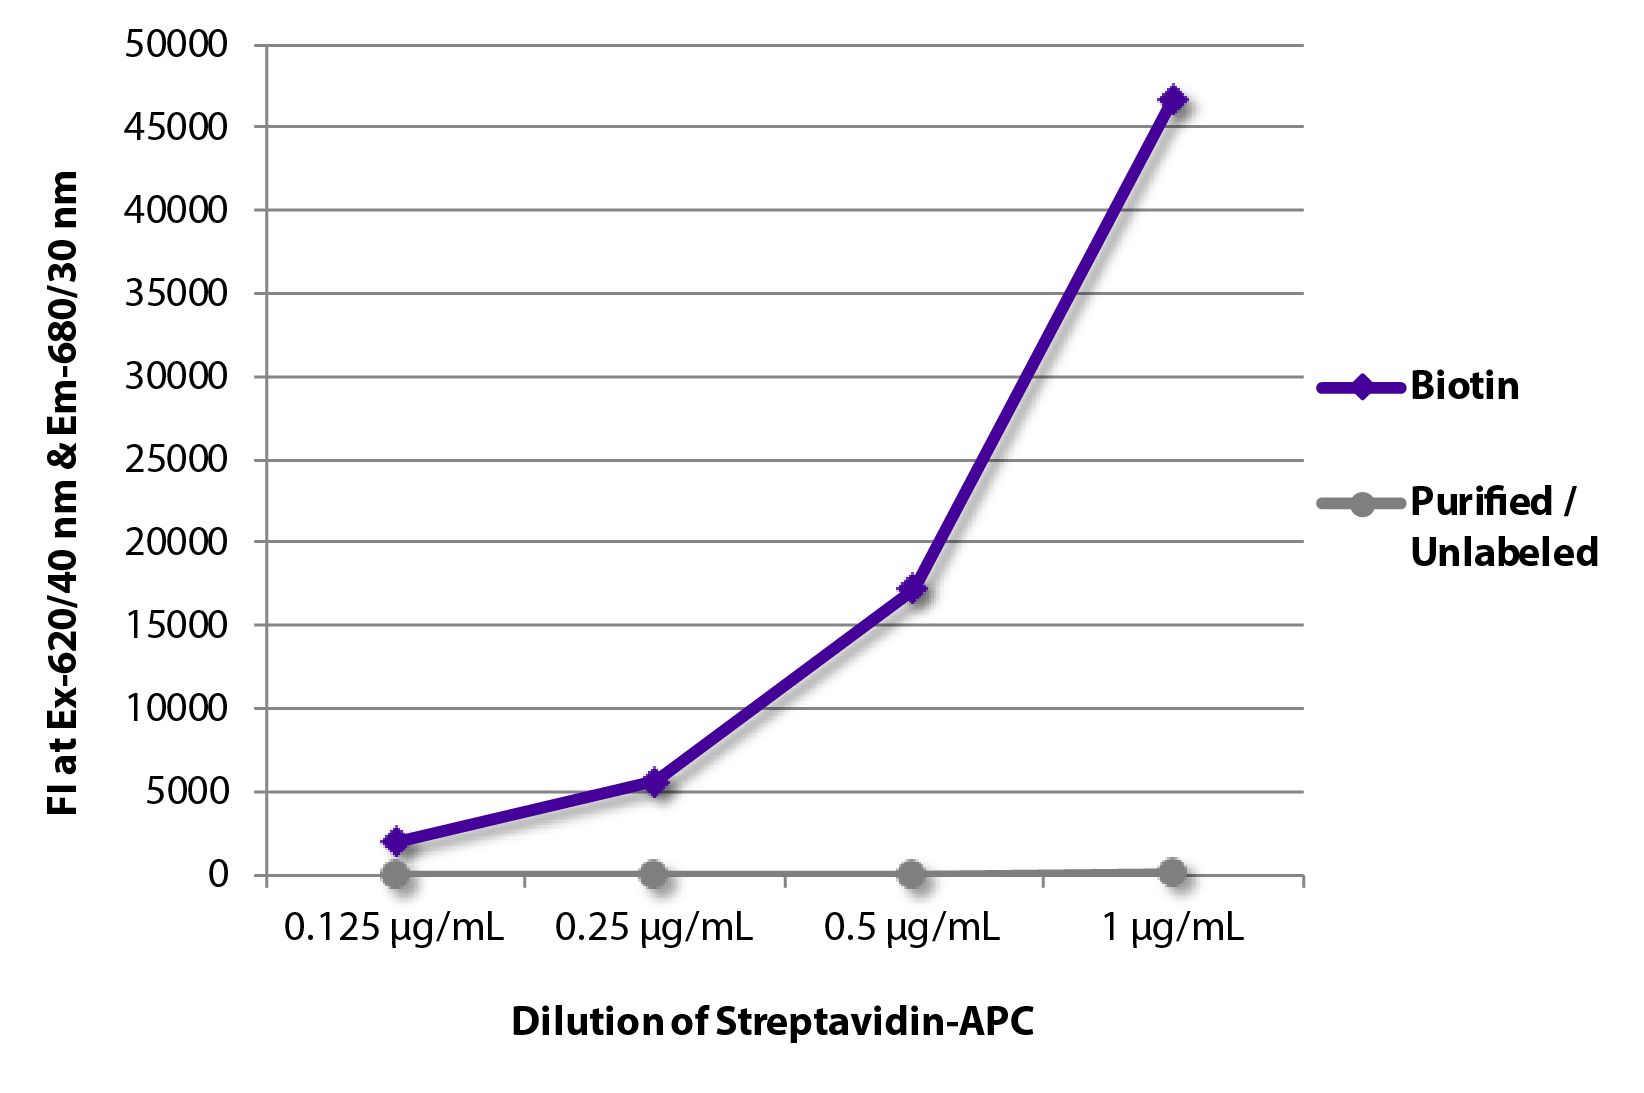 FLISA plate was coated with Goat Anti-Human IgG-BIOT (SB Cat. No. 2040-08) and purified/unlabeled Rat IgG<sub>1</sub>κ.  Biotin conjugated antibody and purified immunoglobulin were detected with serially diluted Streptavidin-APC (SB Cat. No. 7105-11S).